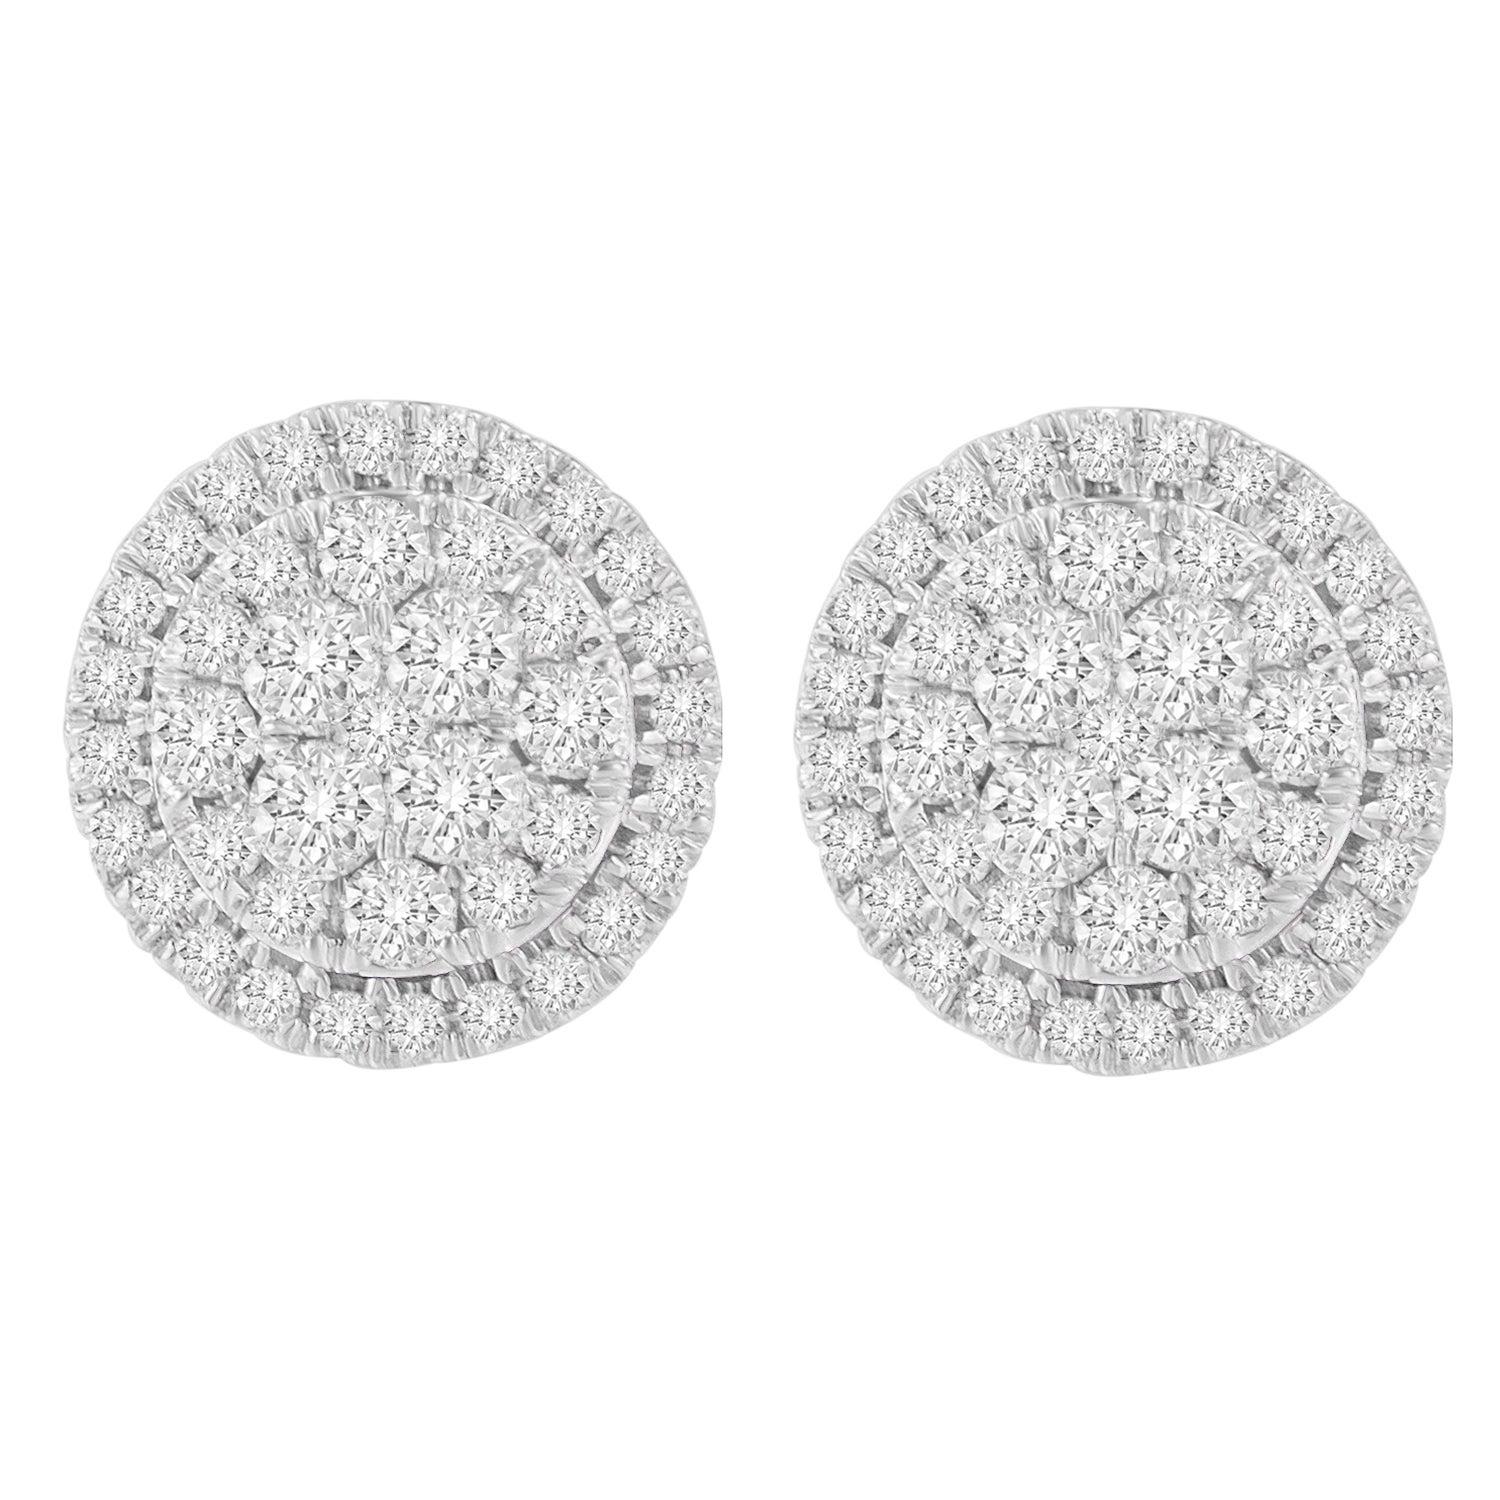 10K Yellow Gold 1 1/2 Carat Composite Floral Diamond Halo Stud Earrings For Sale